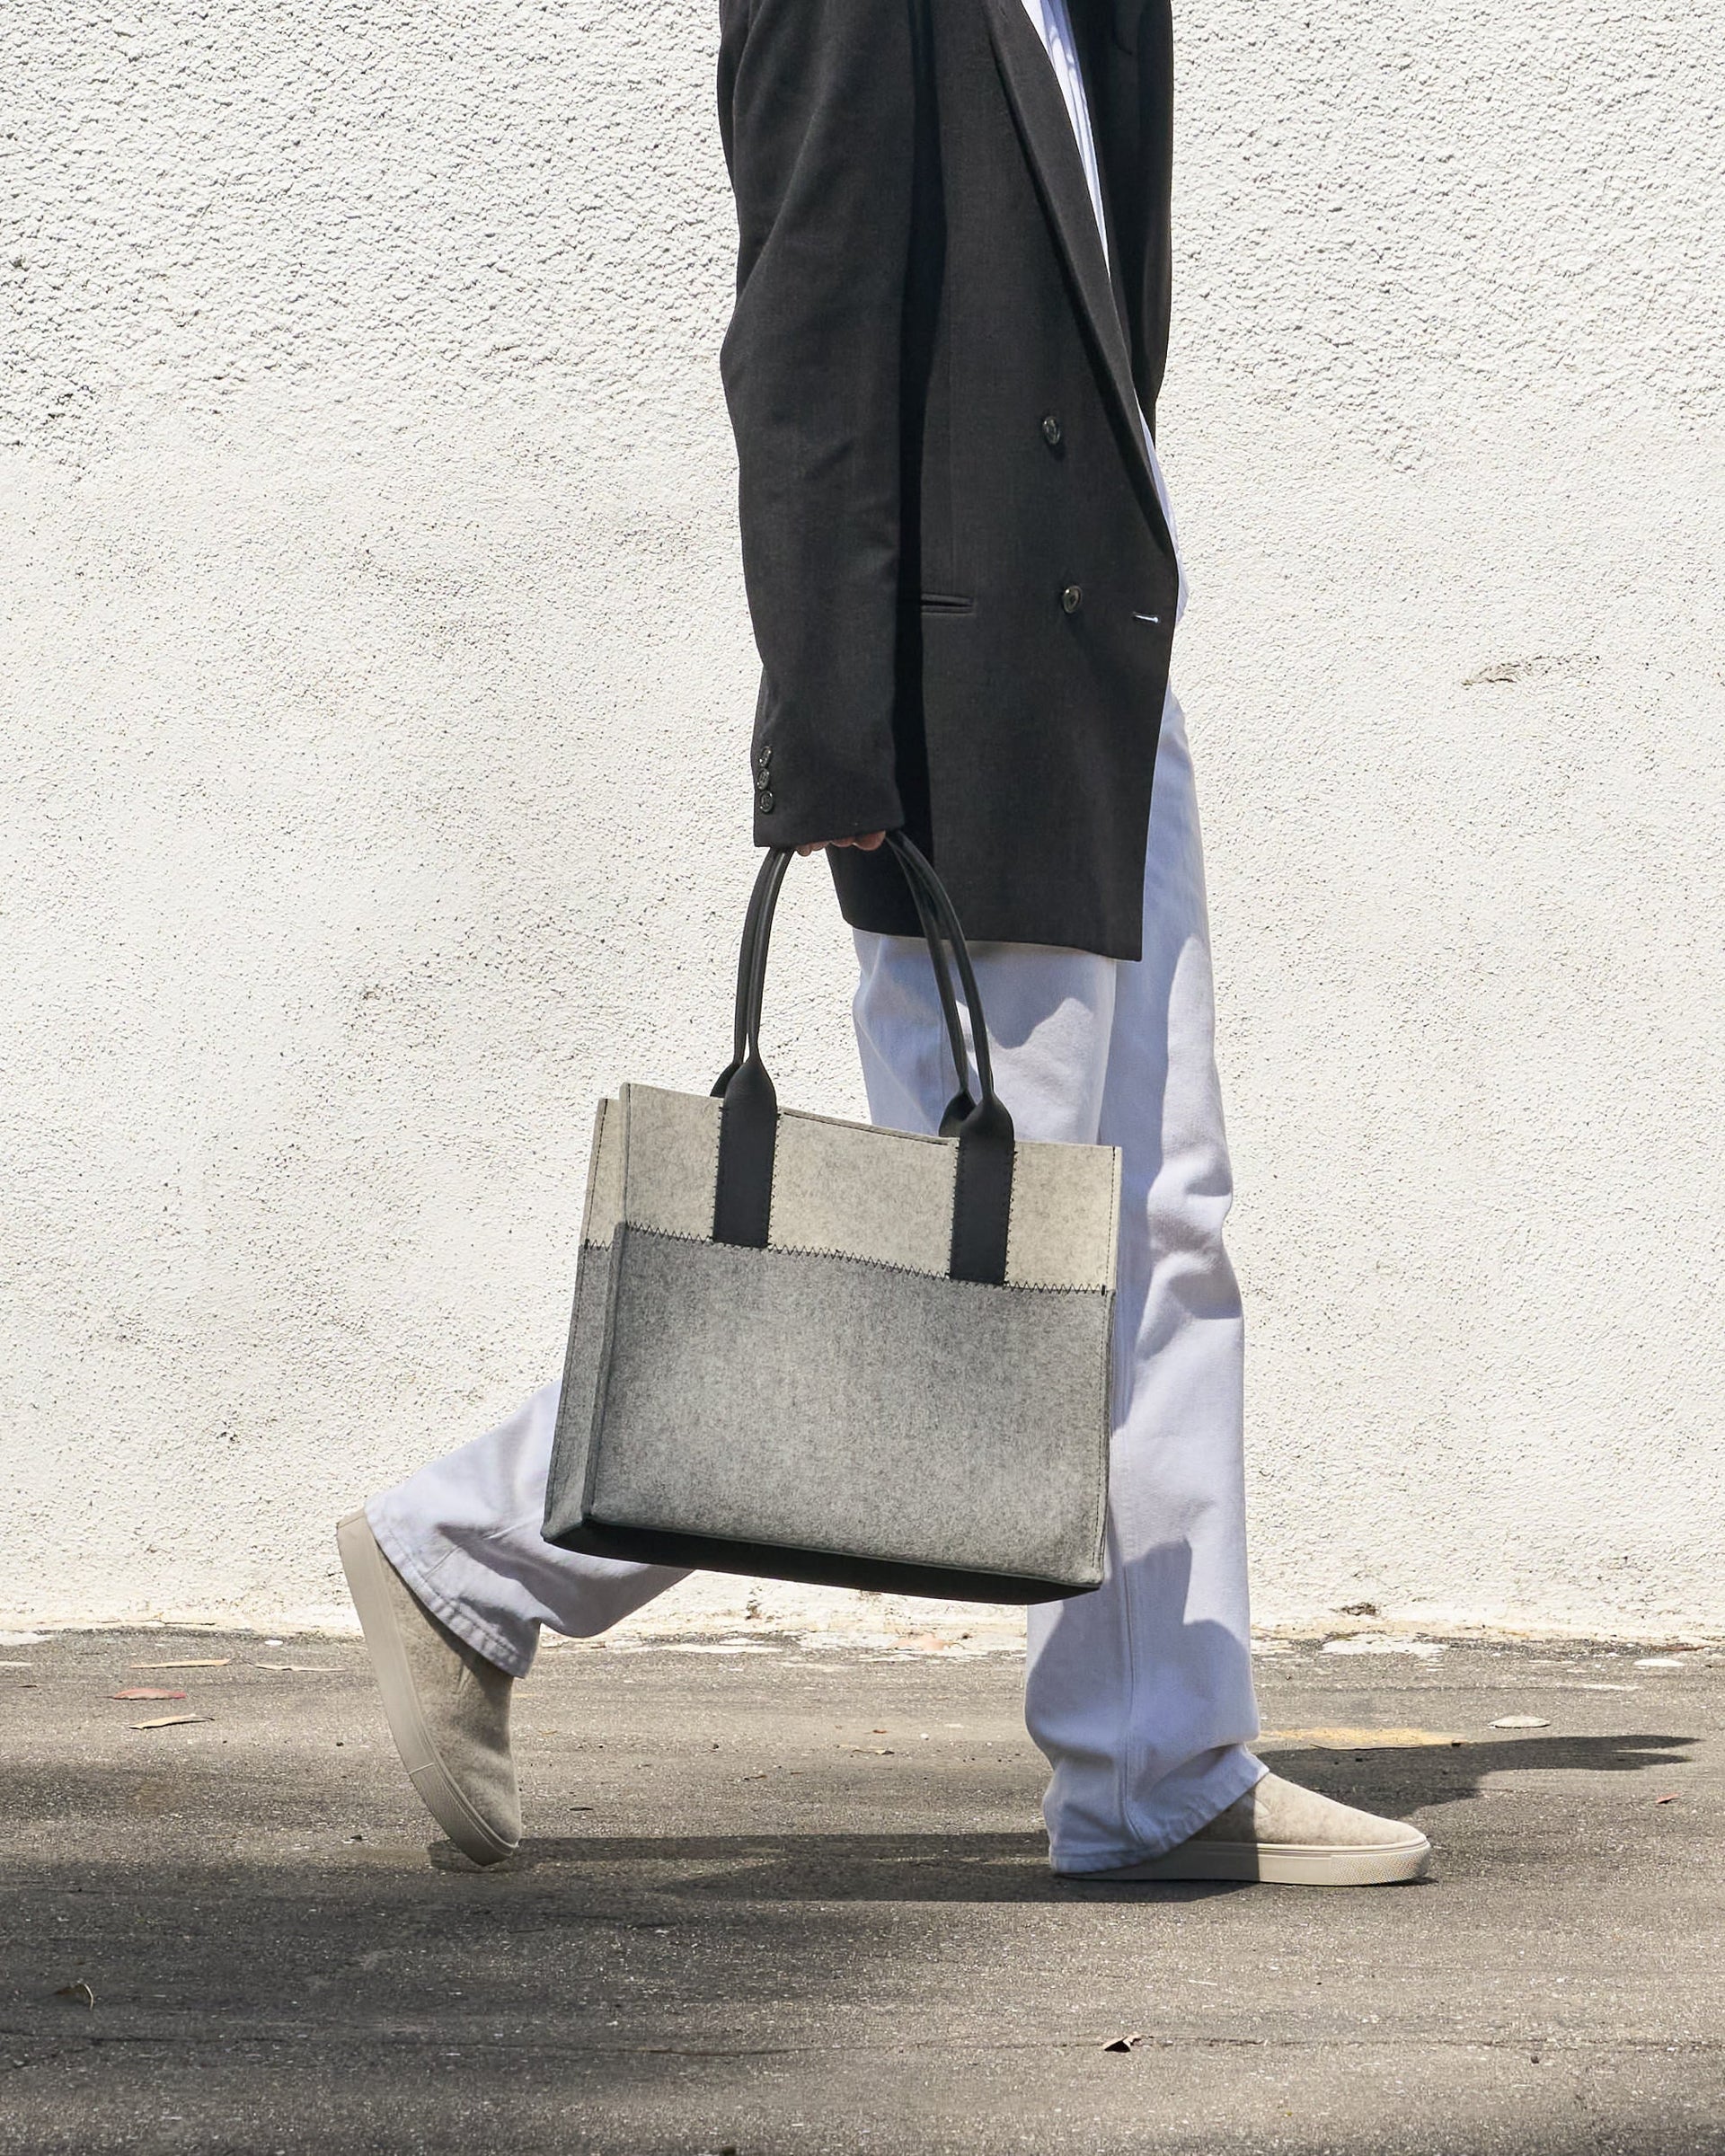 A grey, white, and black colored Jaunt Midi Merino Wool Felt Tote bag is elegantly held by its top handle as a woman walks, showcasing its chic design